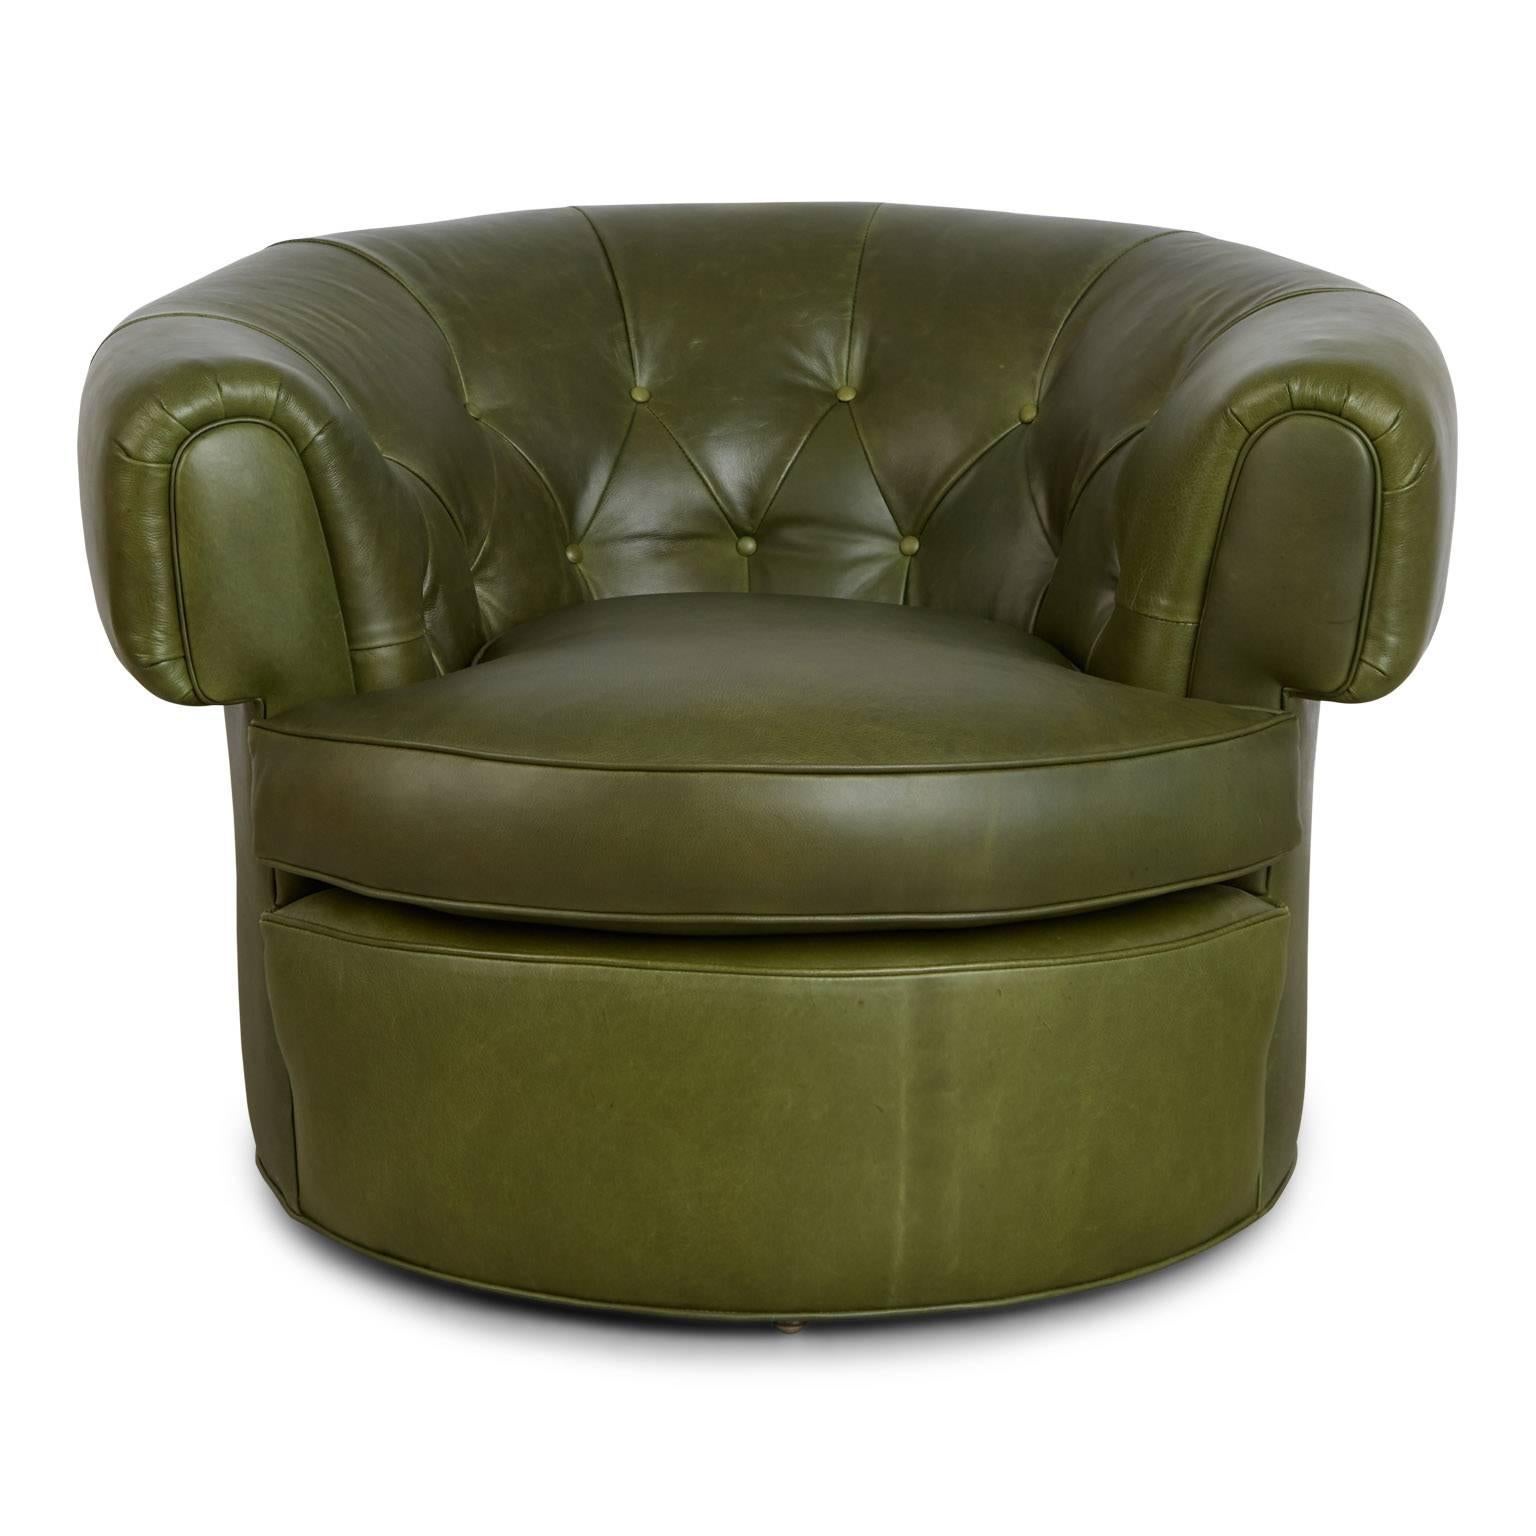 Handsome pair of Chesterfield style lounge chairs that provide a fresh twist on a design classic. These generously sized armchairs have been newly upholstered in forest green 'Old English' distressed leather that features an admirable on-trend